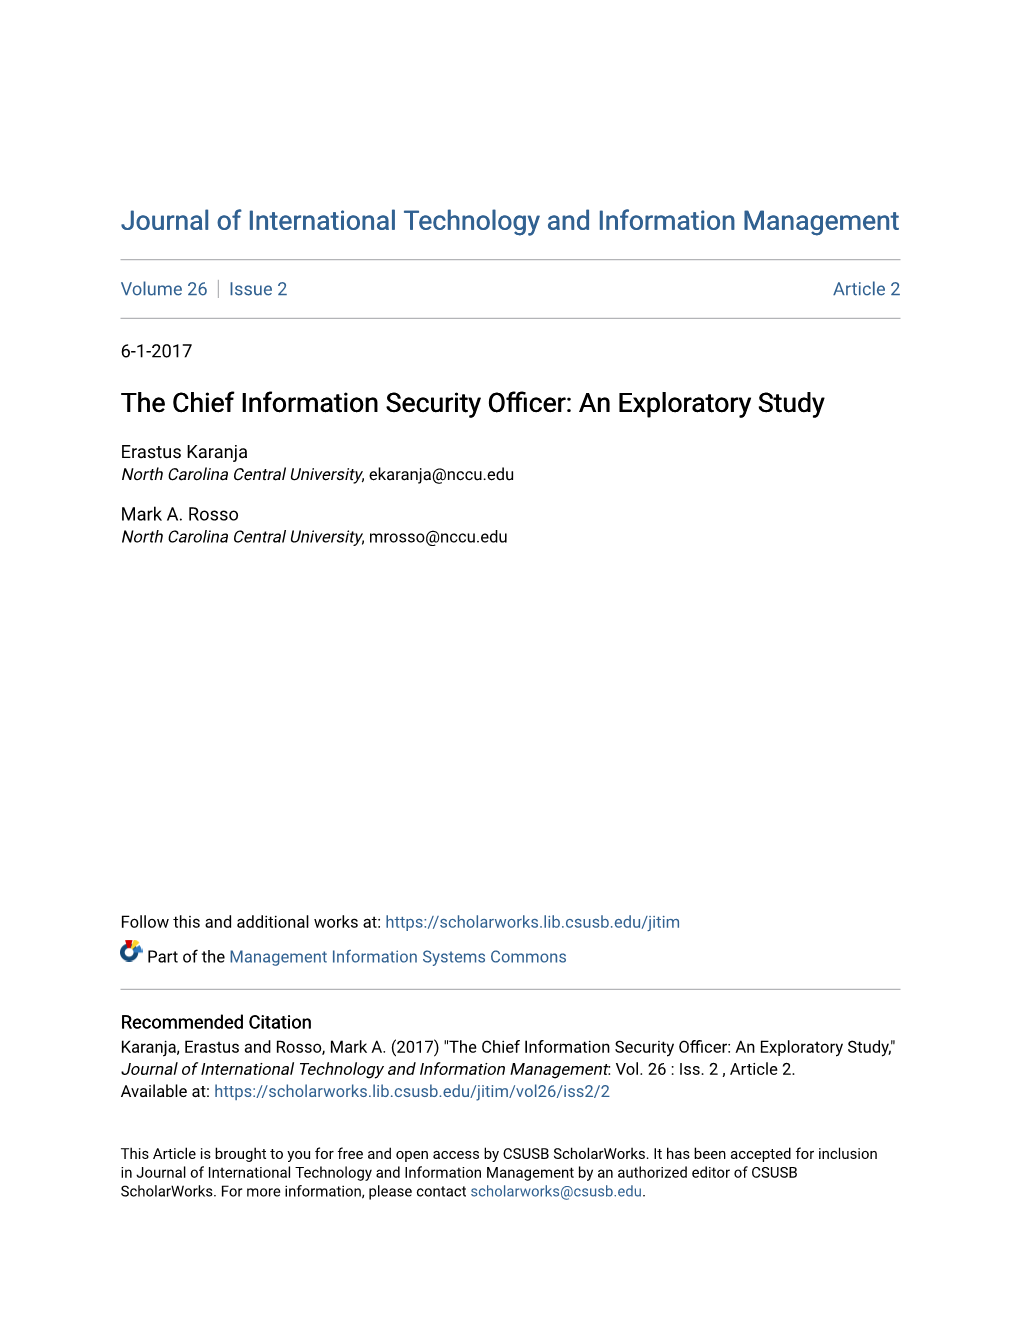 The Chief Information Security Officer: an Exploratory Study